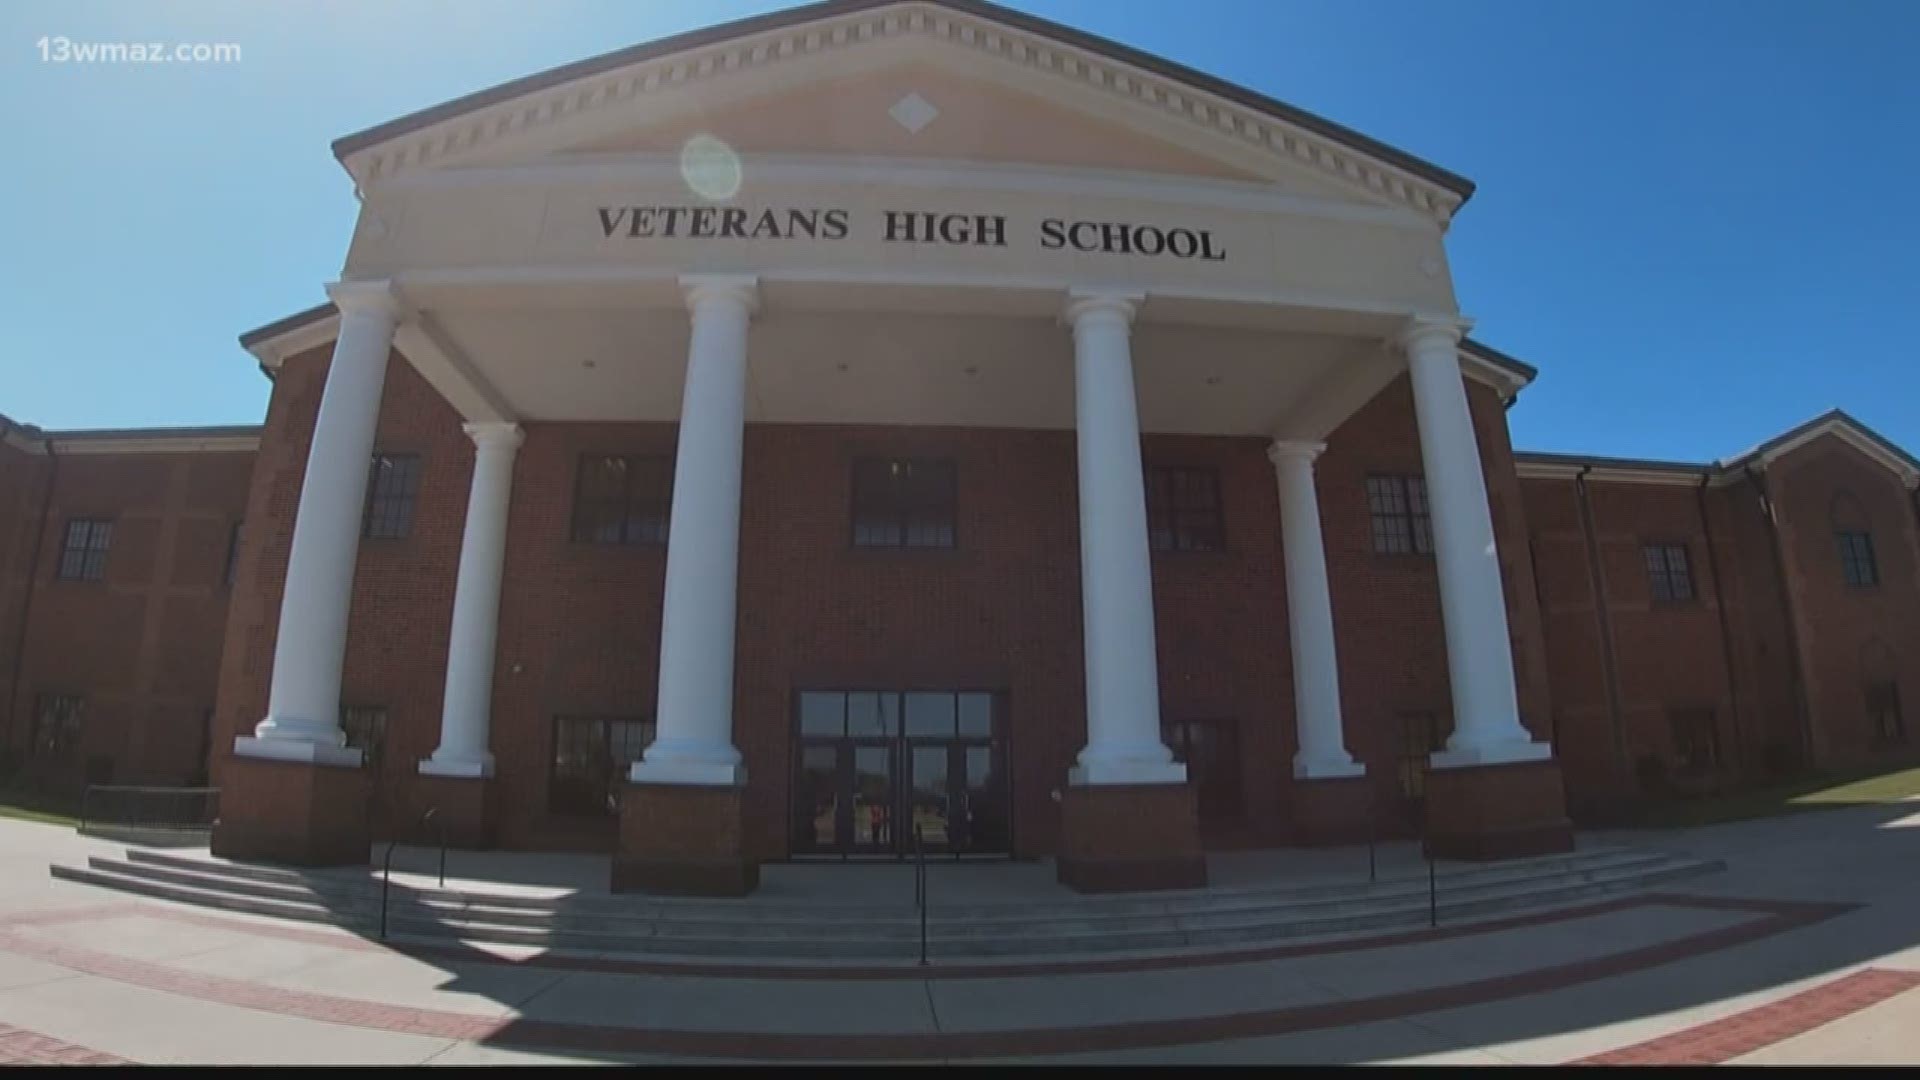 It's been 10 years since Veterans High School opened its doors in Houston County, and some teachers who have been there since the beginning said a lot has changed.